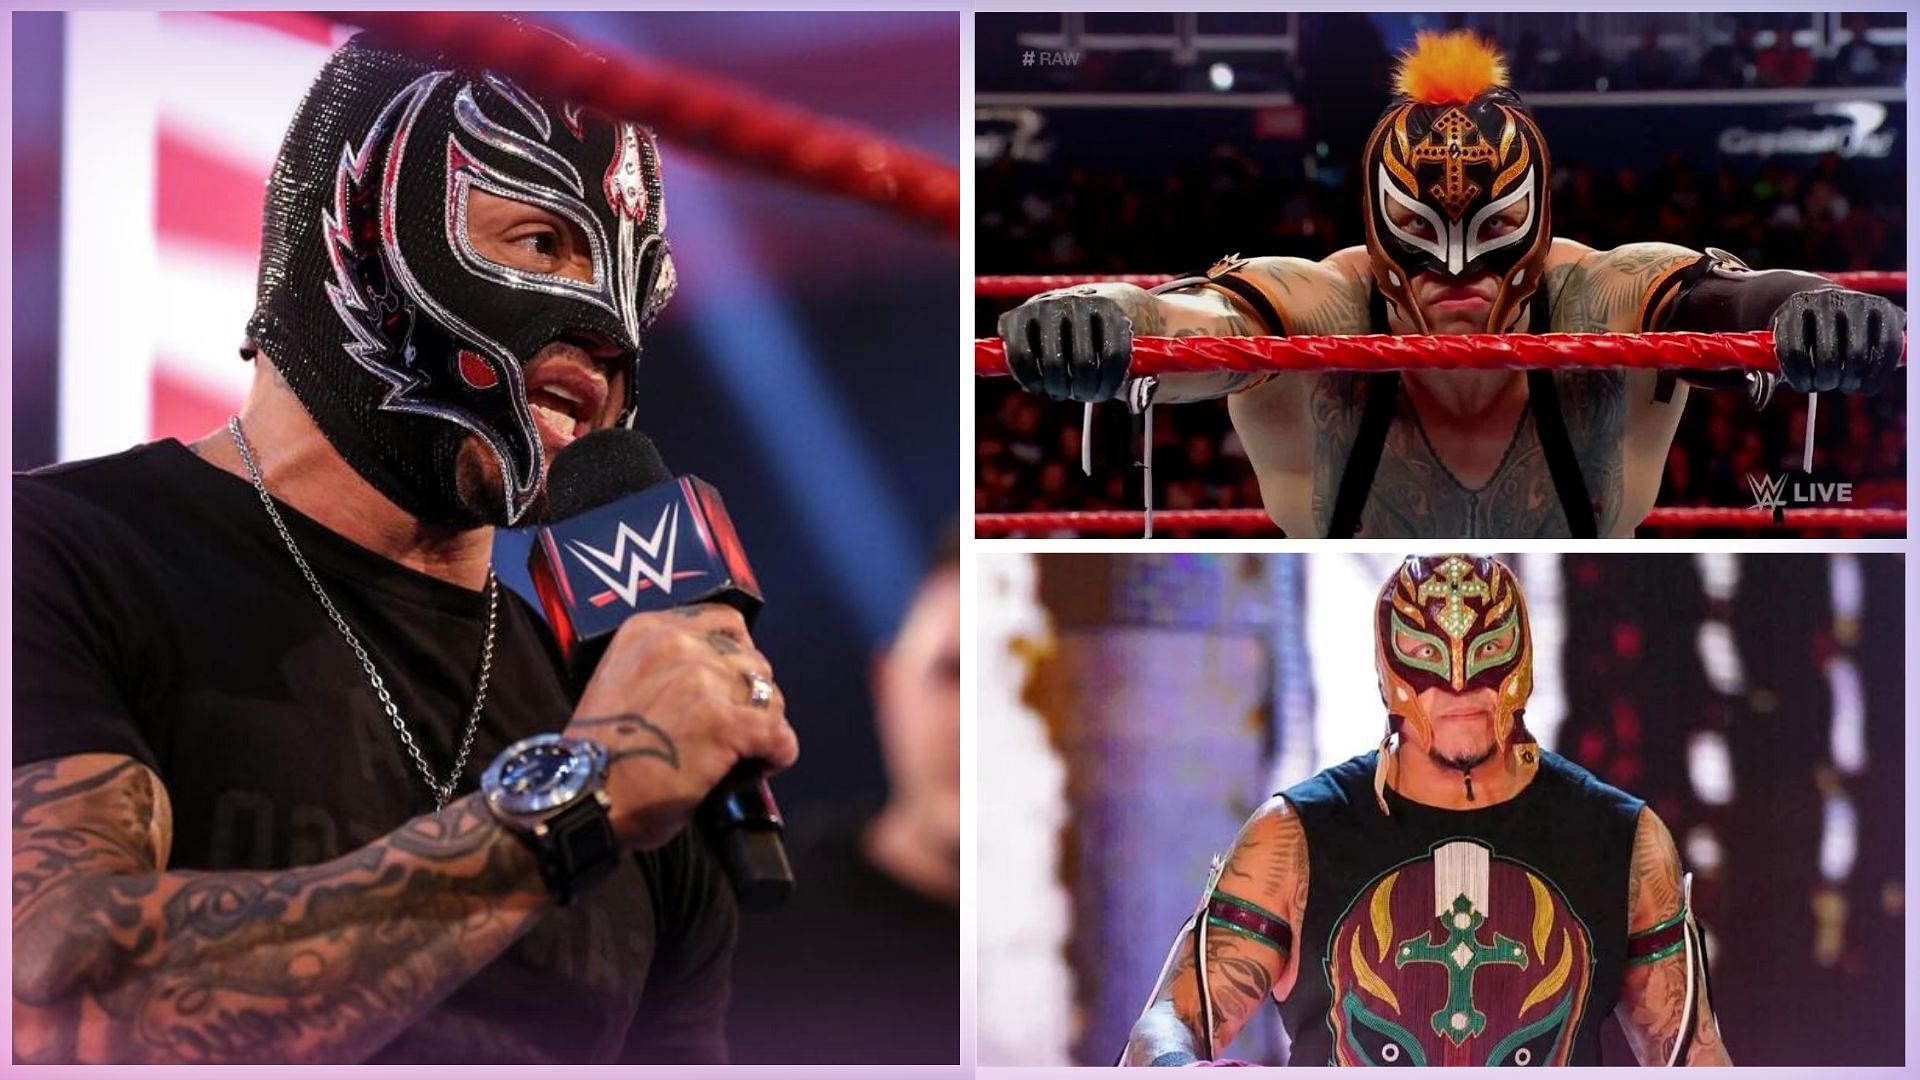 Rey Mysterio is a former WWE Champion.